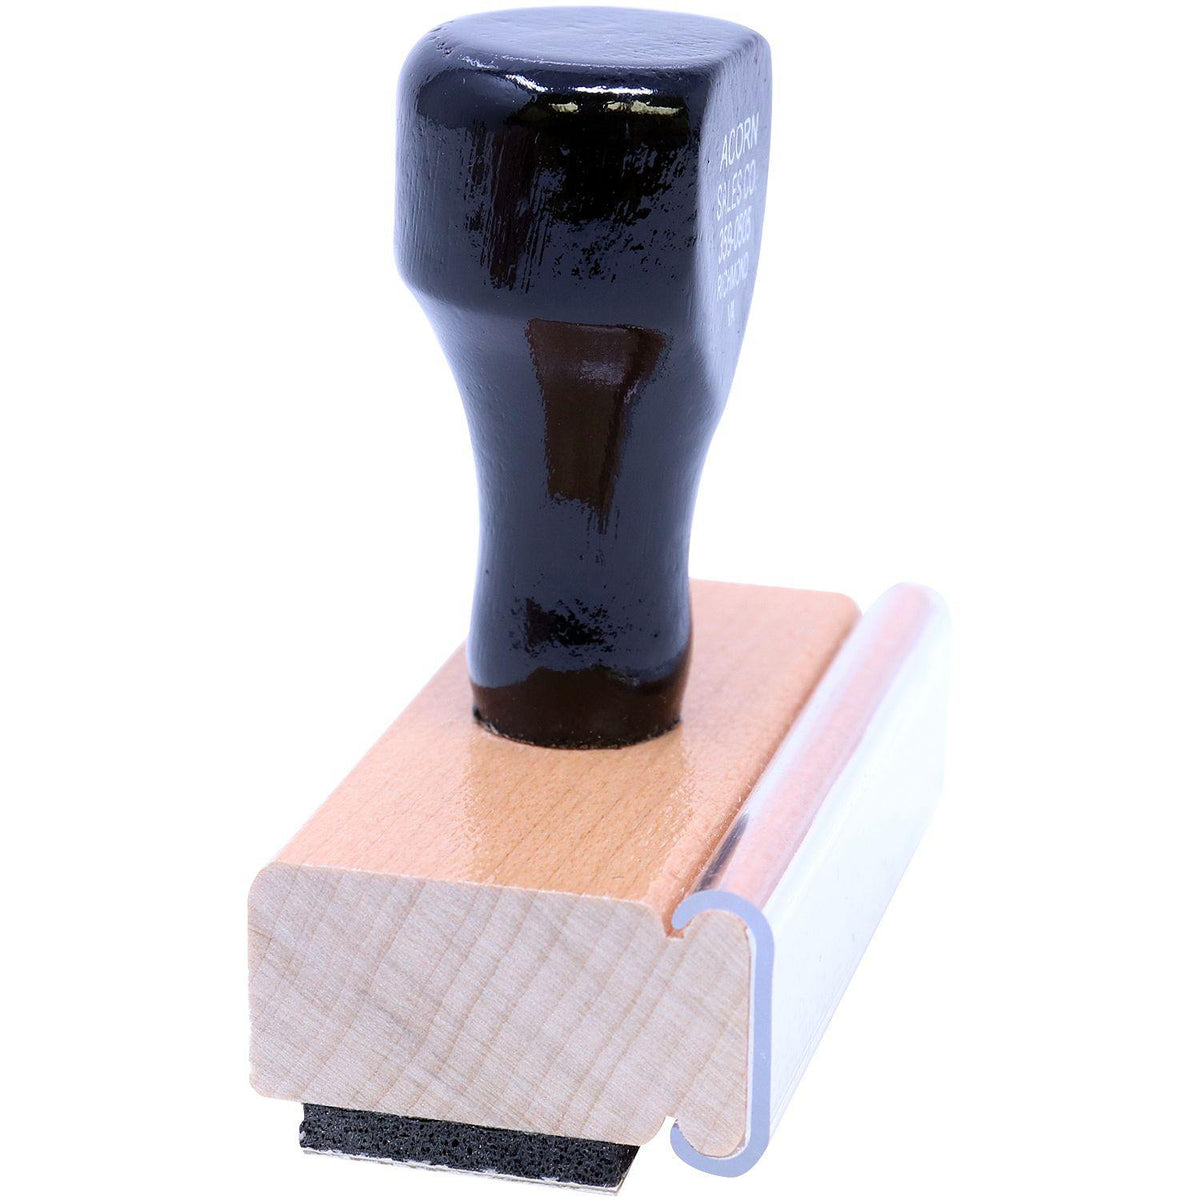 Side View of Large Pagado Rubber Stamp at an Angle